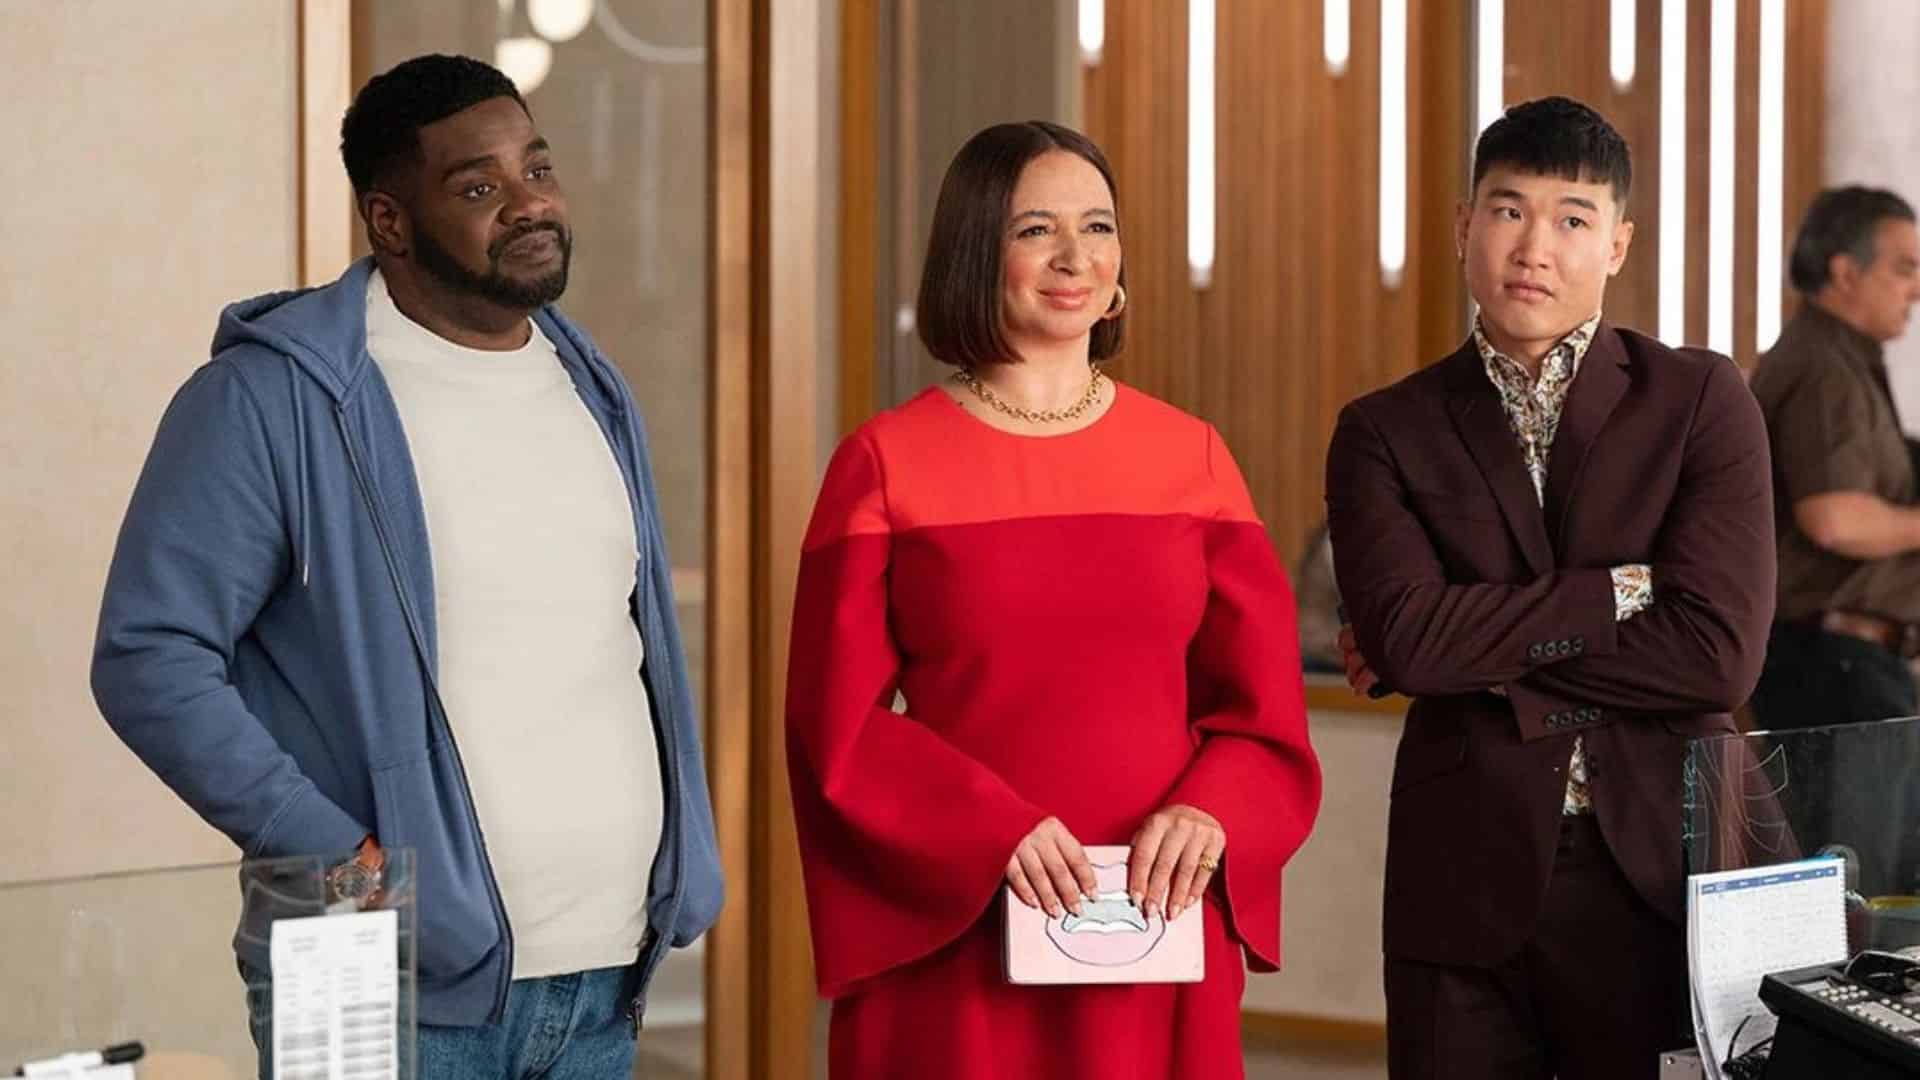 ‘Loot’ Review: Maya Rudolph At Her Best In This Timeless Comedy